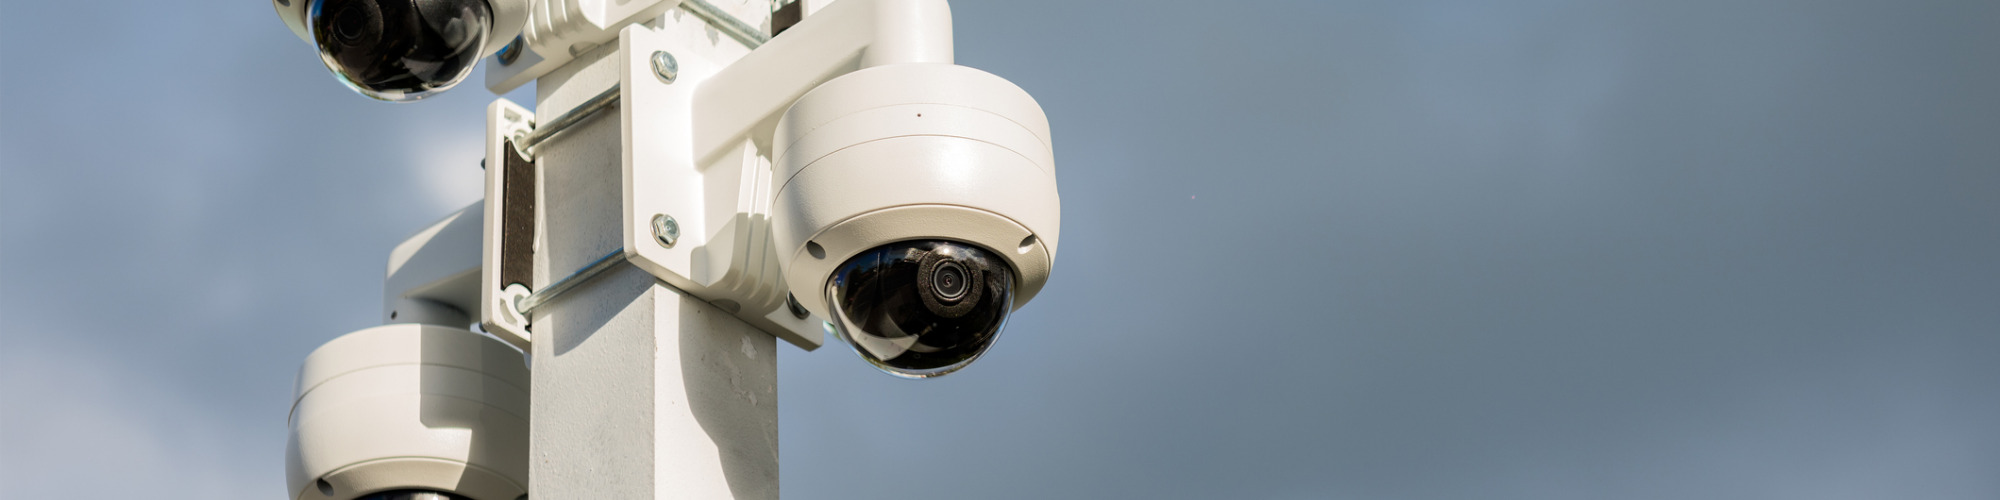 Surveillance Evidence in Personal Injury Claims - Navigating the Issues 